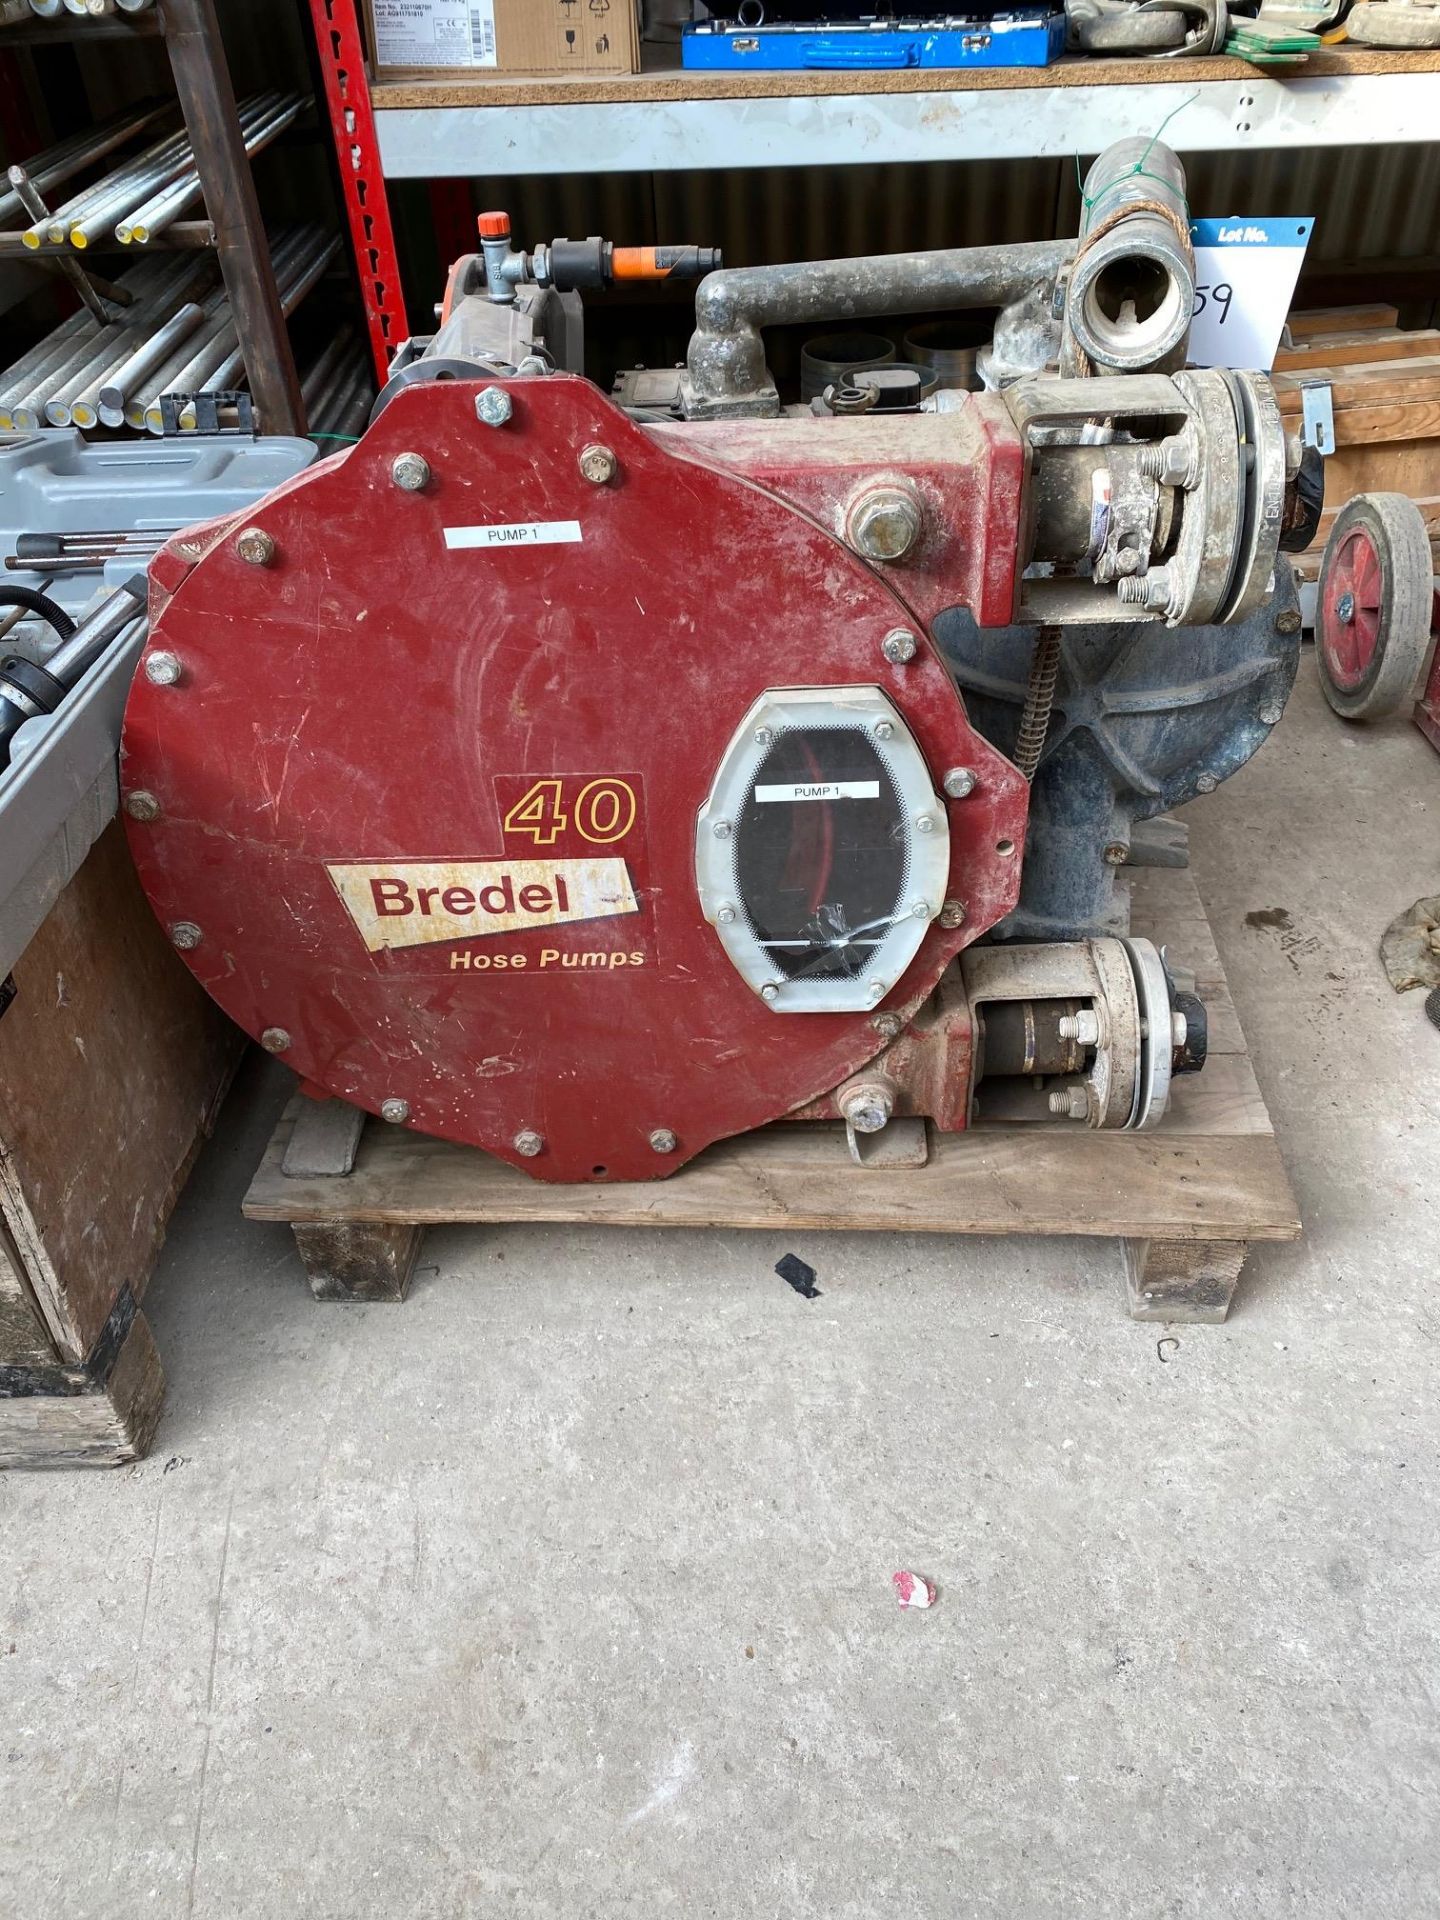 Bredel, Model: 40 Full Protected Hose Pump, Dry running and self-priming up to 9.5m suction